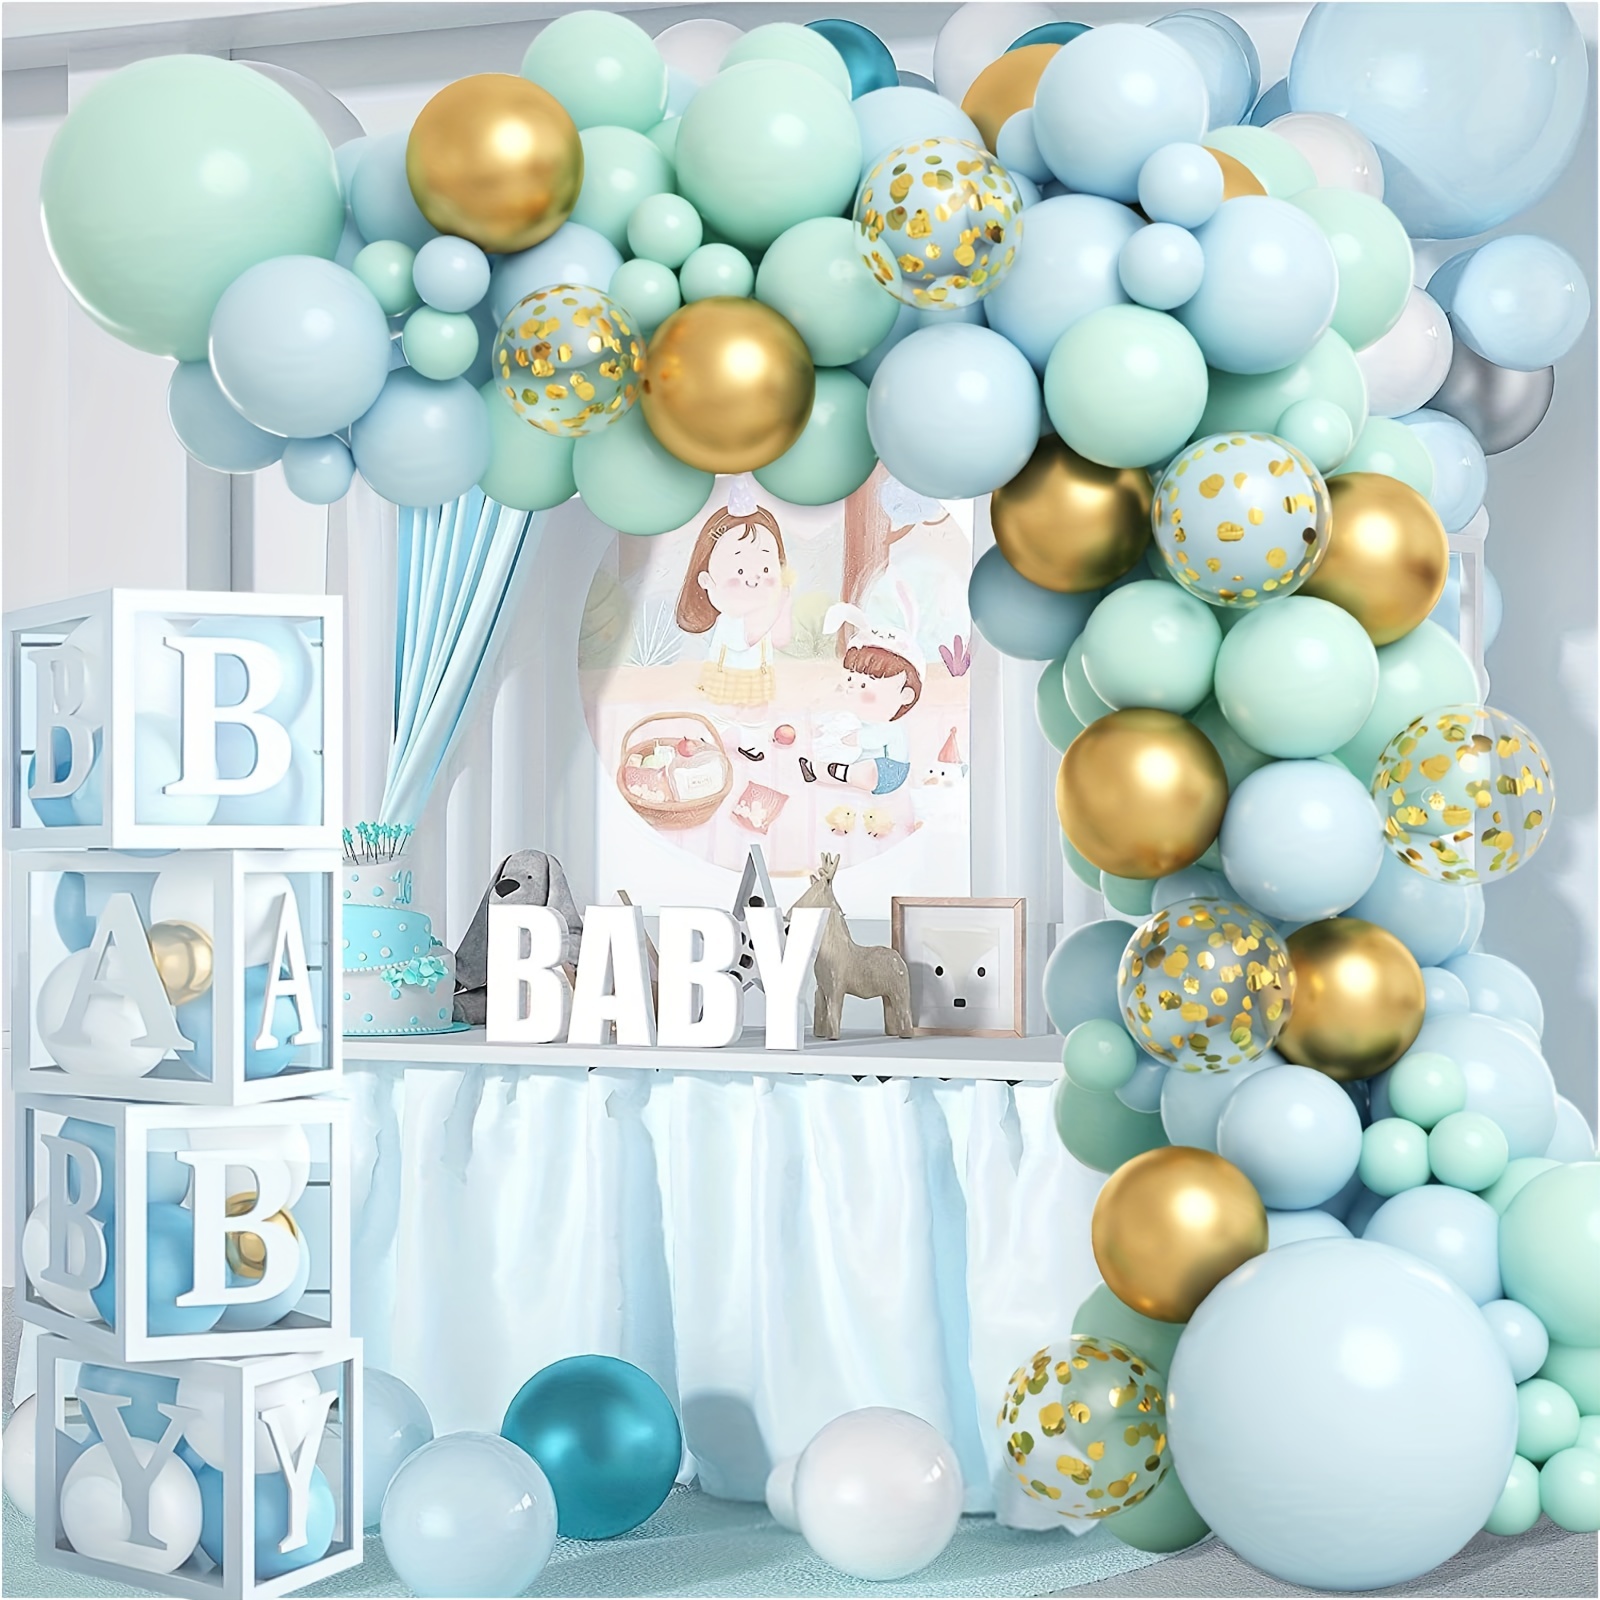 Set, Mint Green Blue Golden/brown Golden Balloon Wreath Set, Totaling  124/157 Latex Balloons, Suitable For Weddings, Baby Showers, Birthday Party  Deco